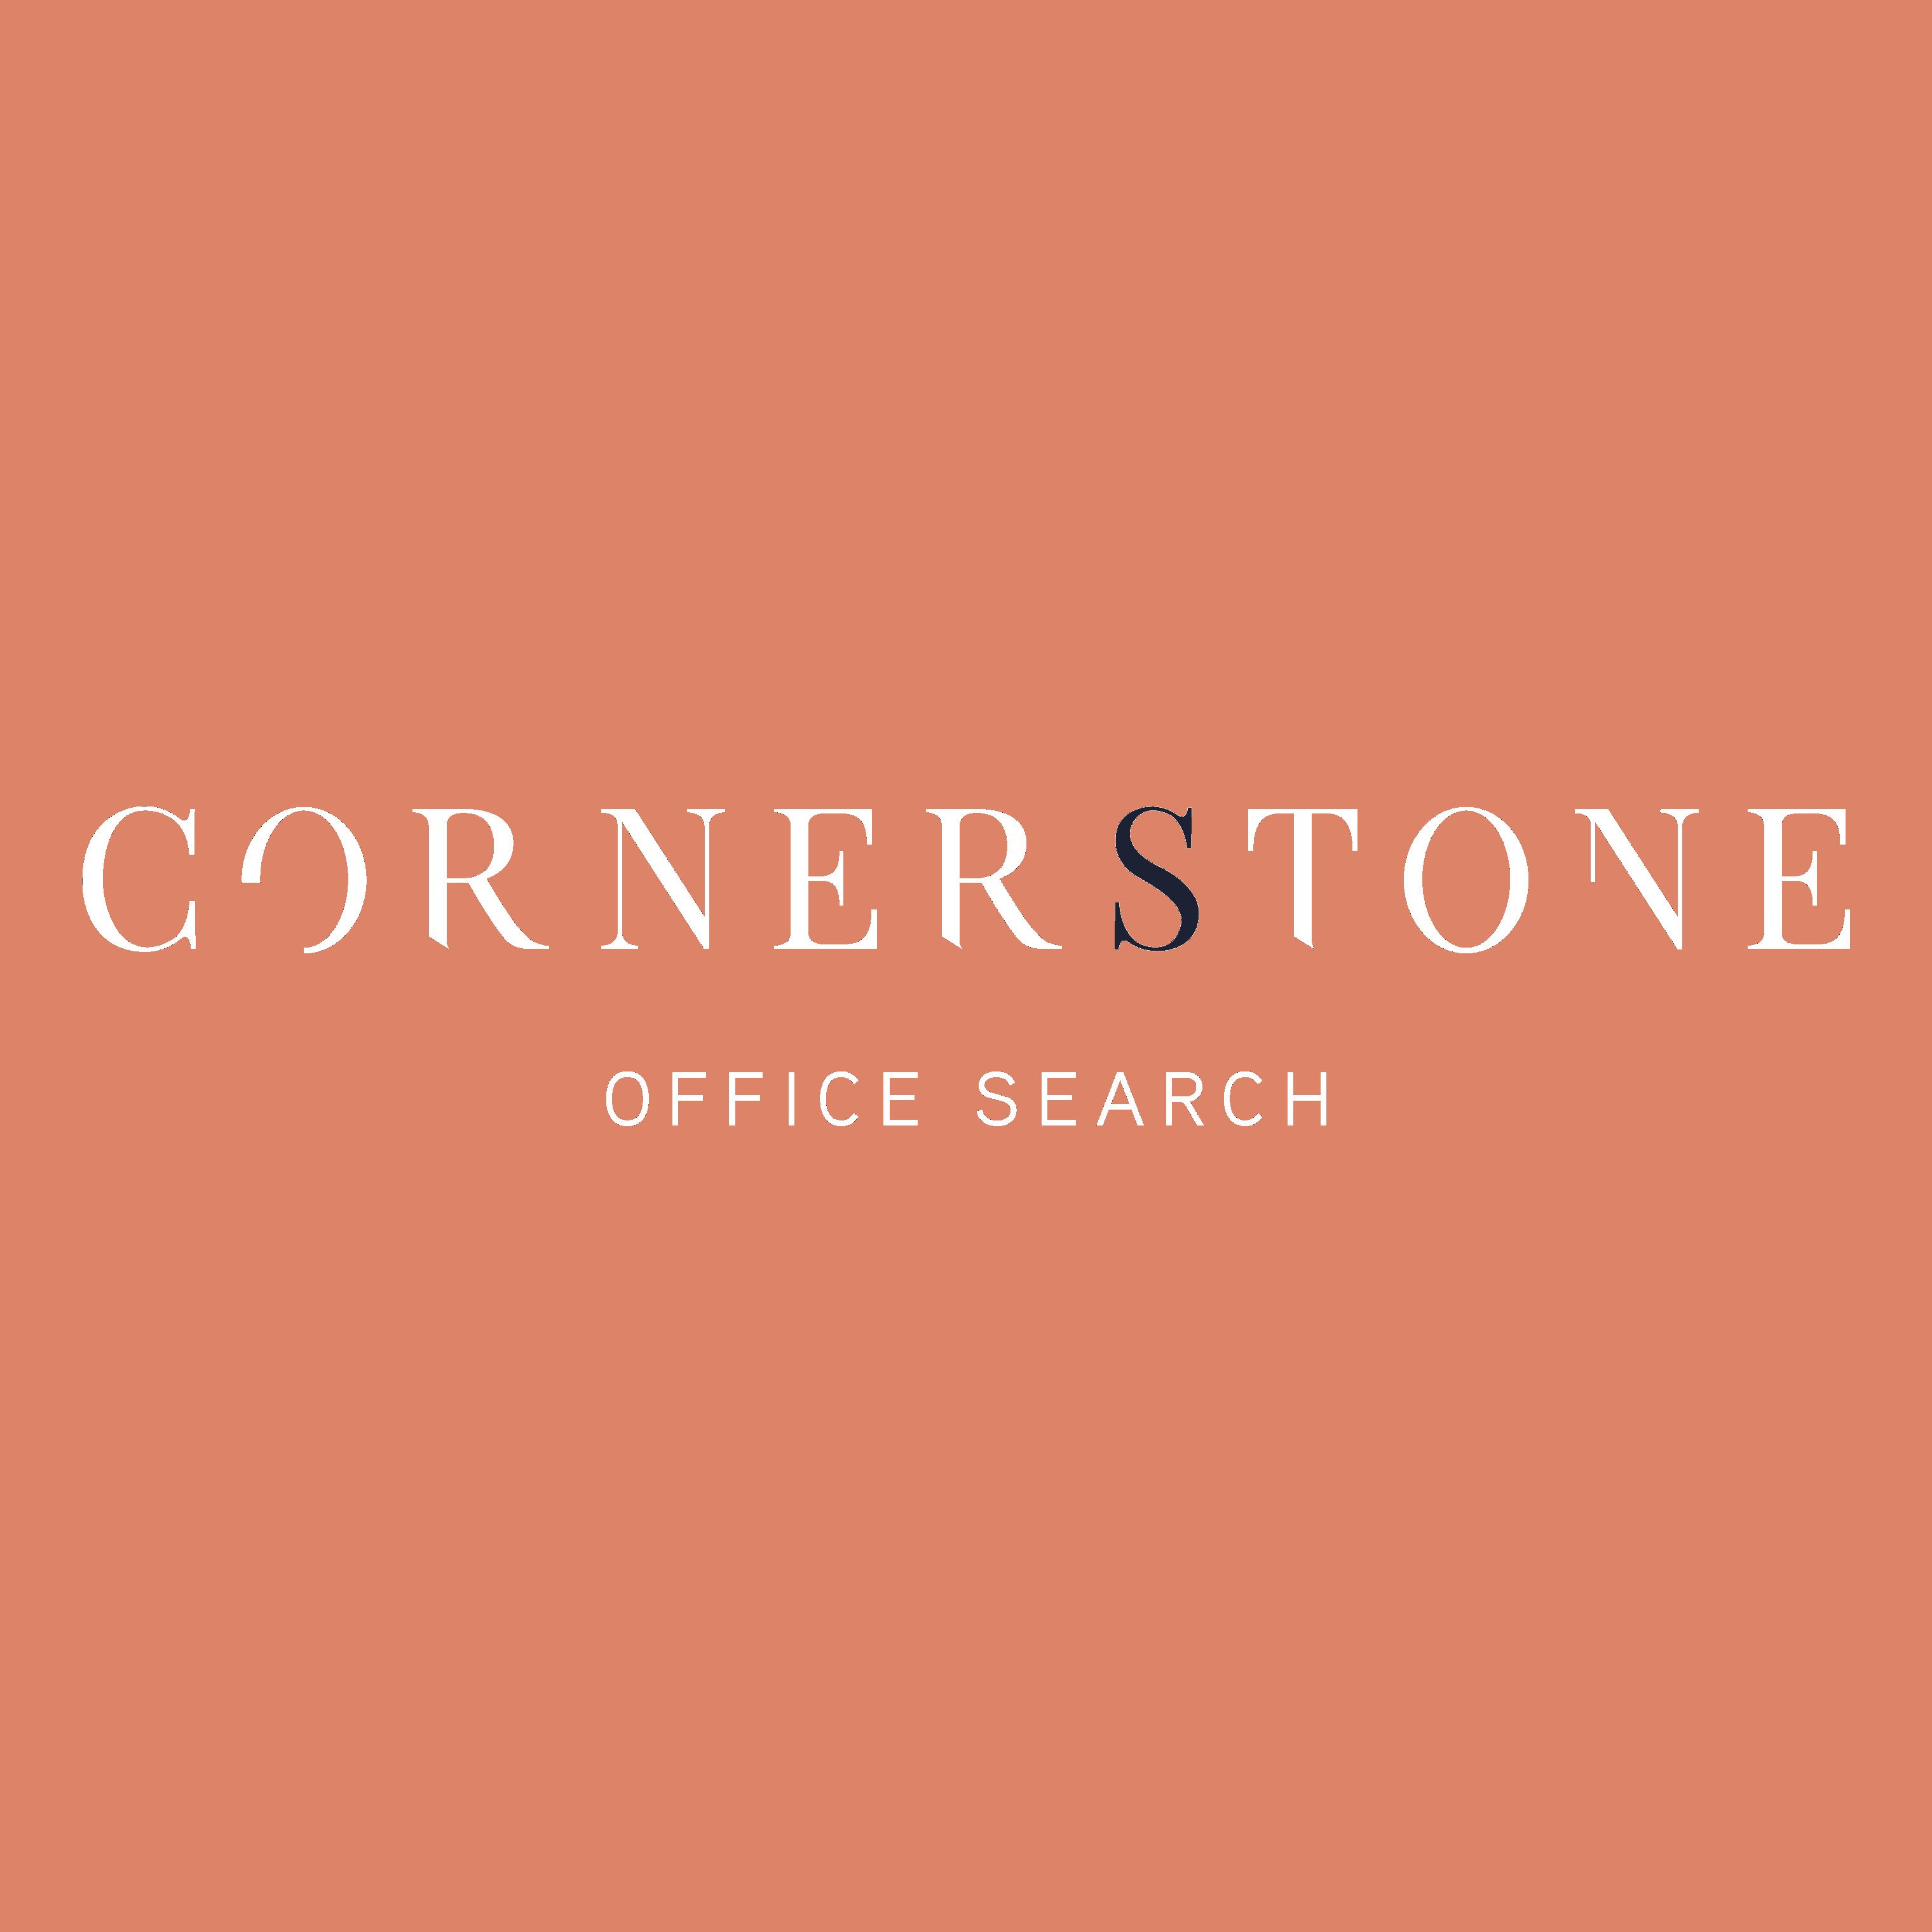 Whilst the office search market is dominated by the same types of brokers and agents, we are a small and completely independent team with over 30 years combined